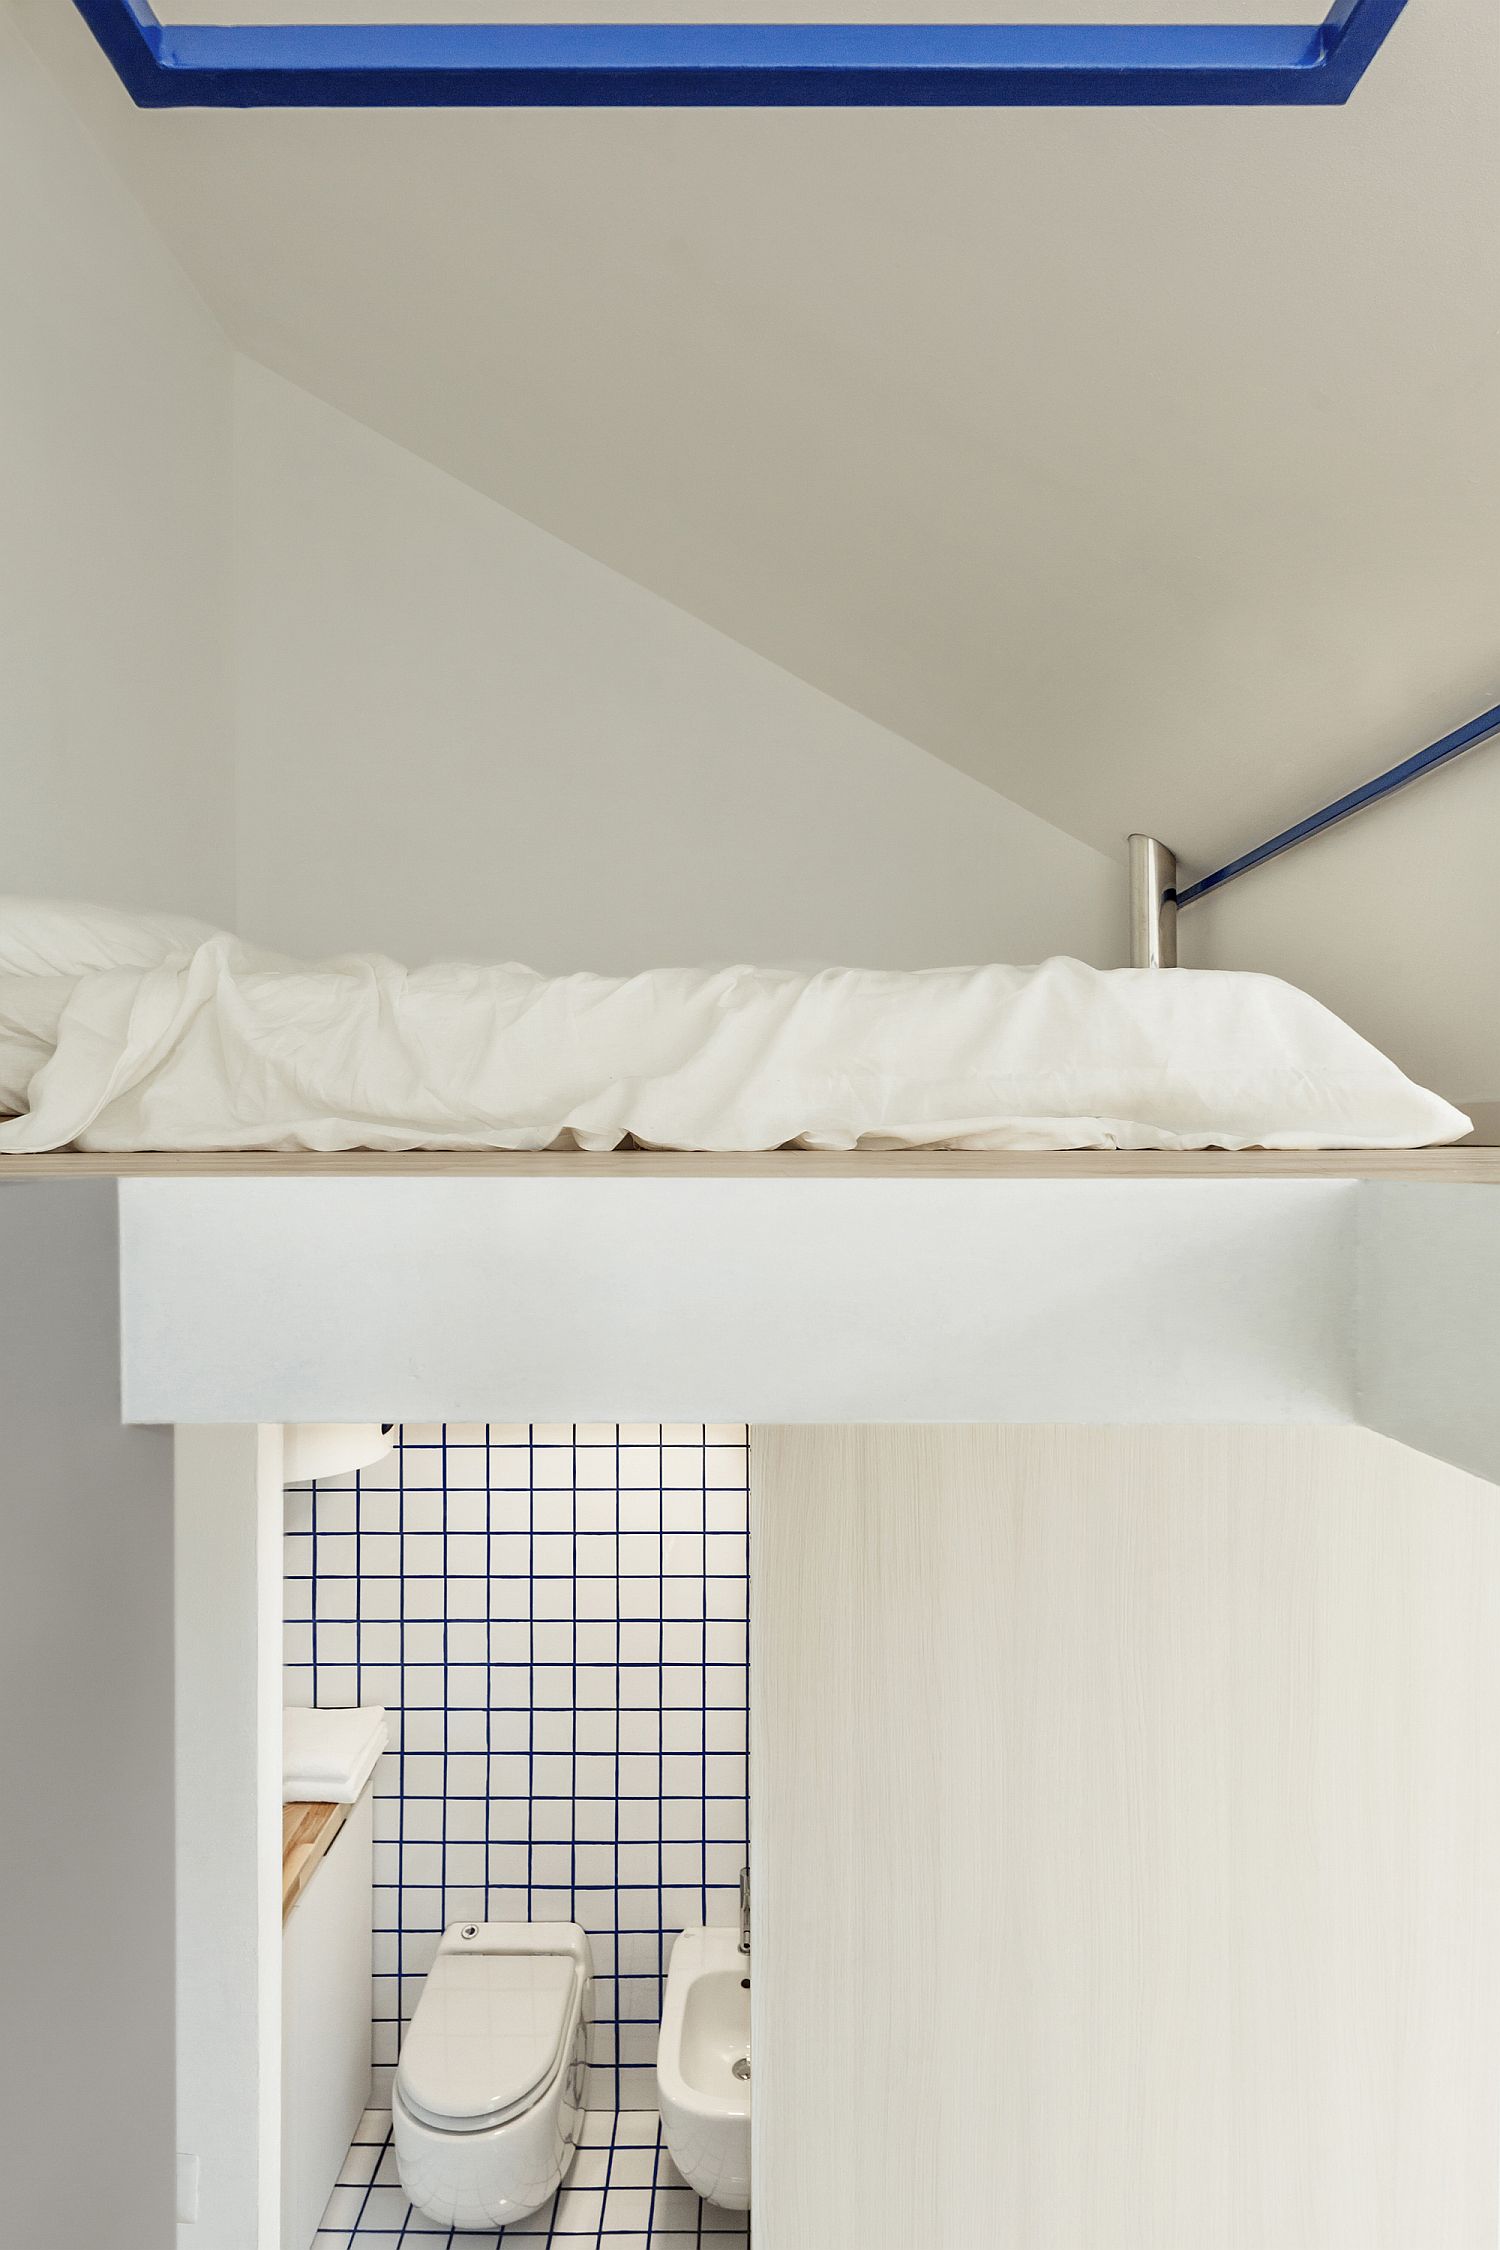 Loft level bed area inside the apartment saves ample space